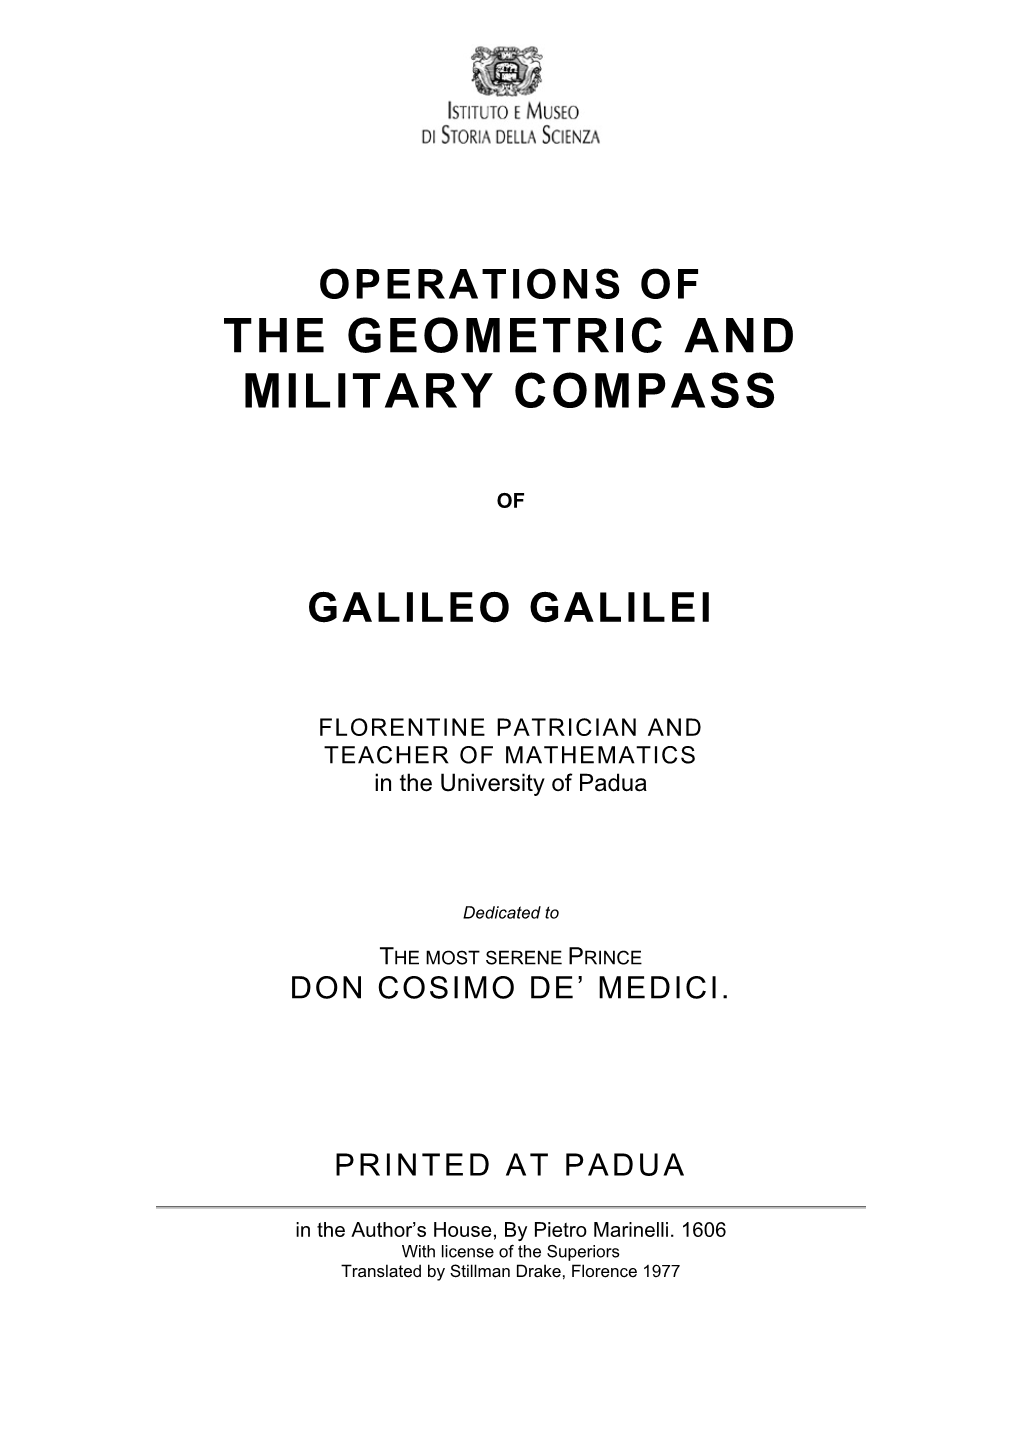 Operations of the Geometric and Military Compass